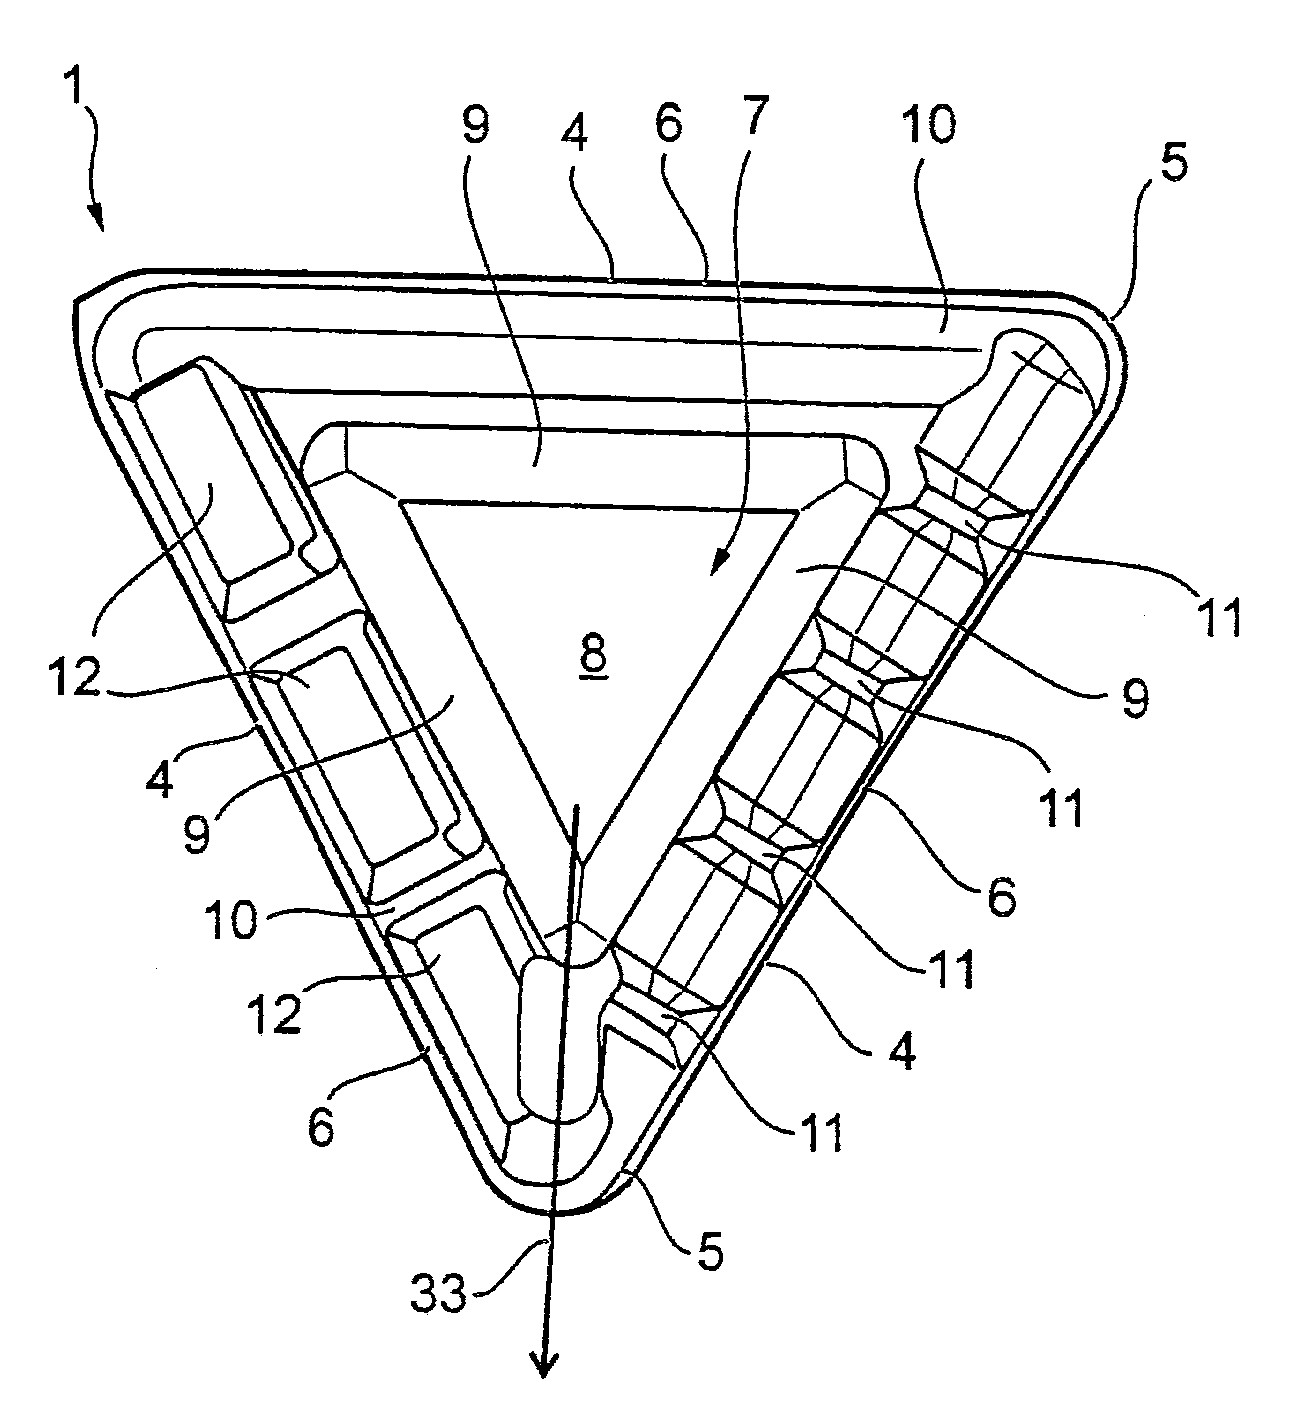 Chip-Removing Tool